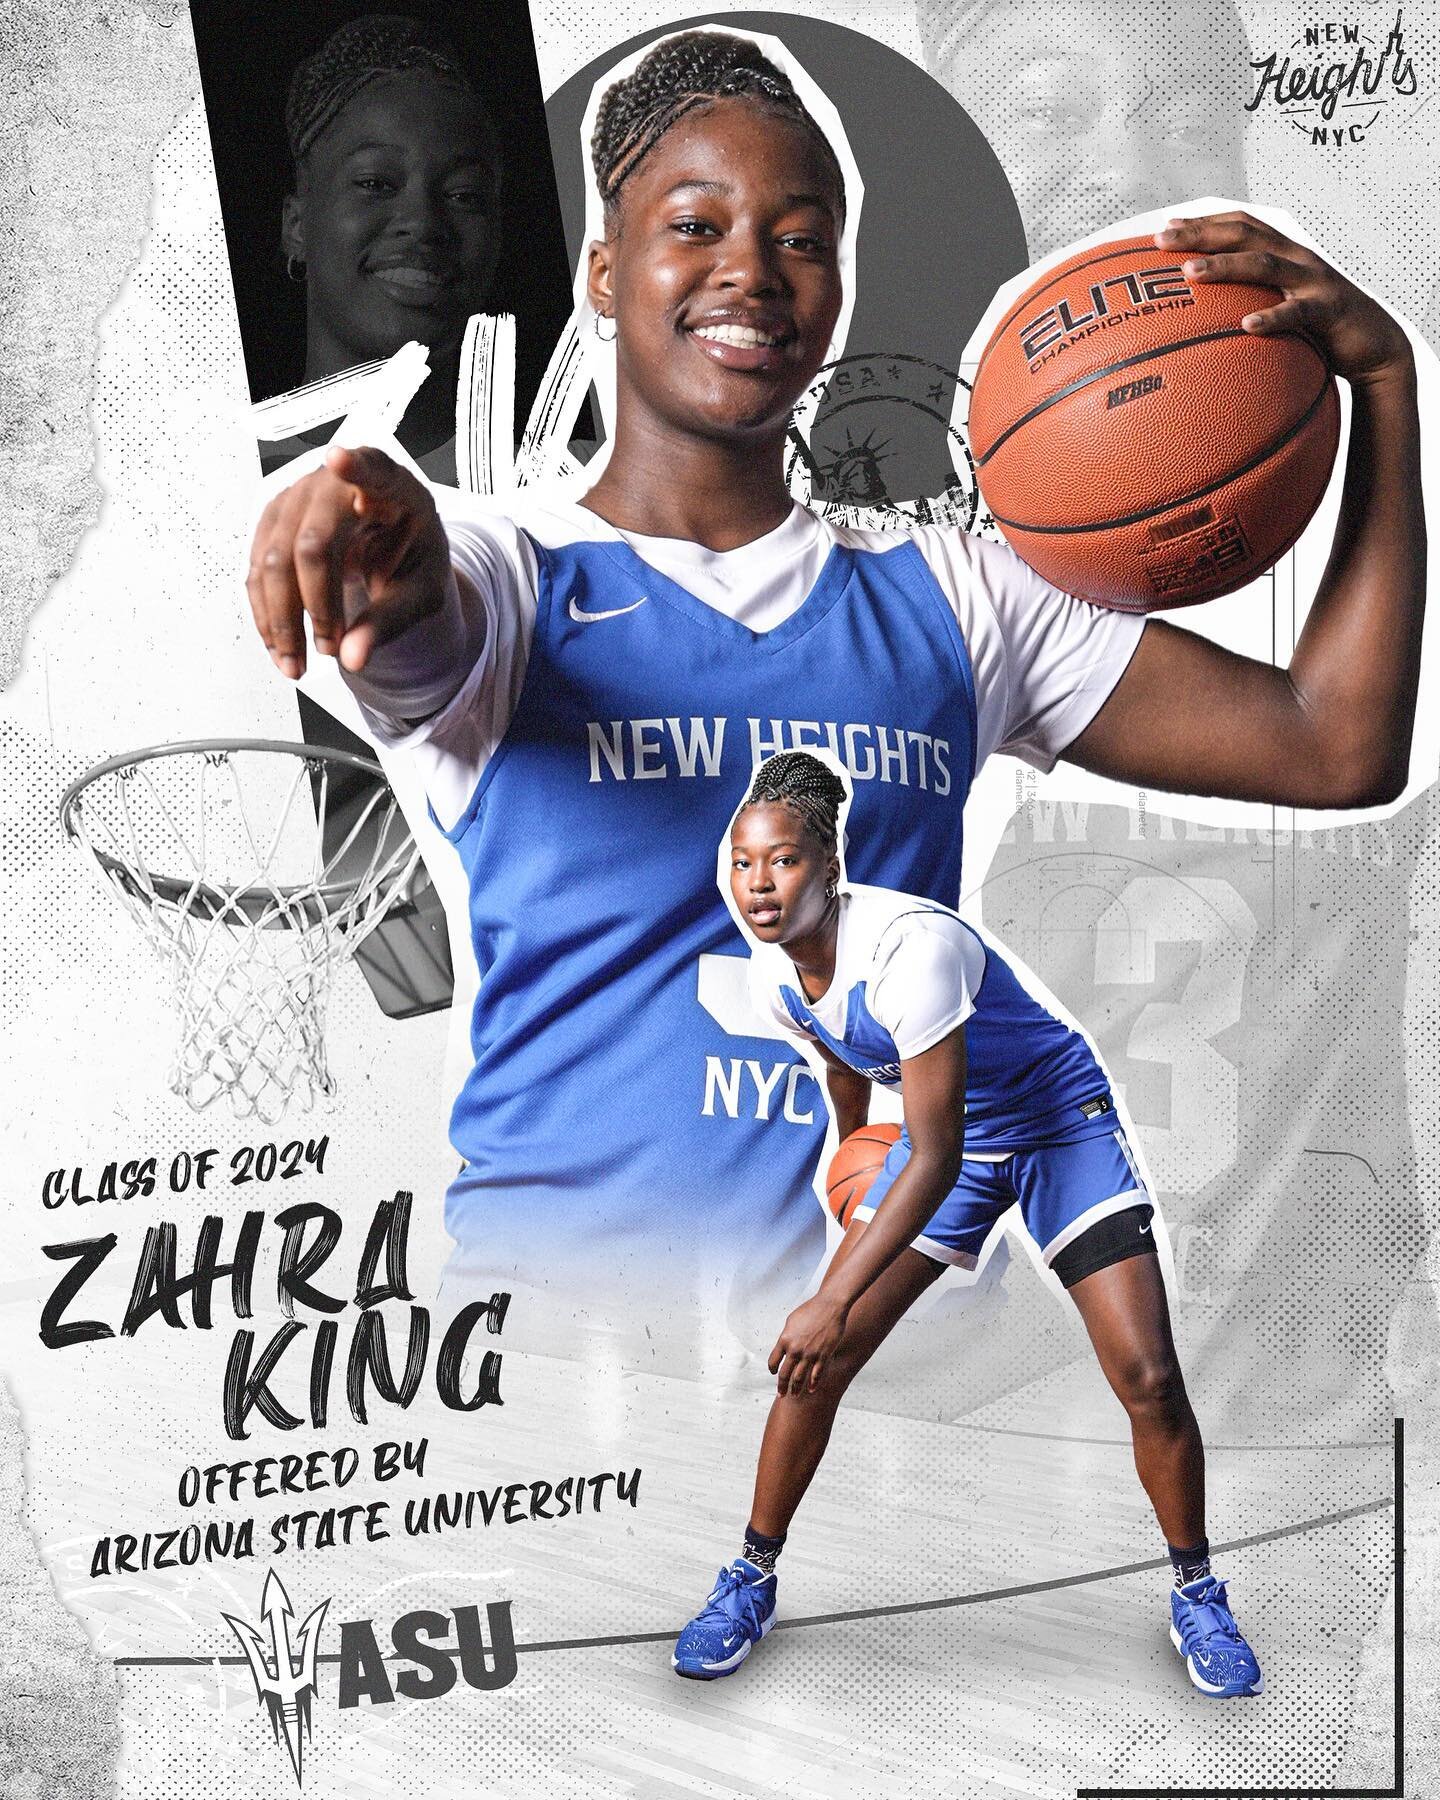 Shoutout to ZK from BK for picking up an offer from @sundevilwbb (Arizona State) - you can catch her this weekend in Dallas as she hits the road again to represent 🗽- Let&rsquo;s go Z! 

#NEWHEIGHTSNYC🔴⚪️🔵